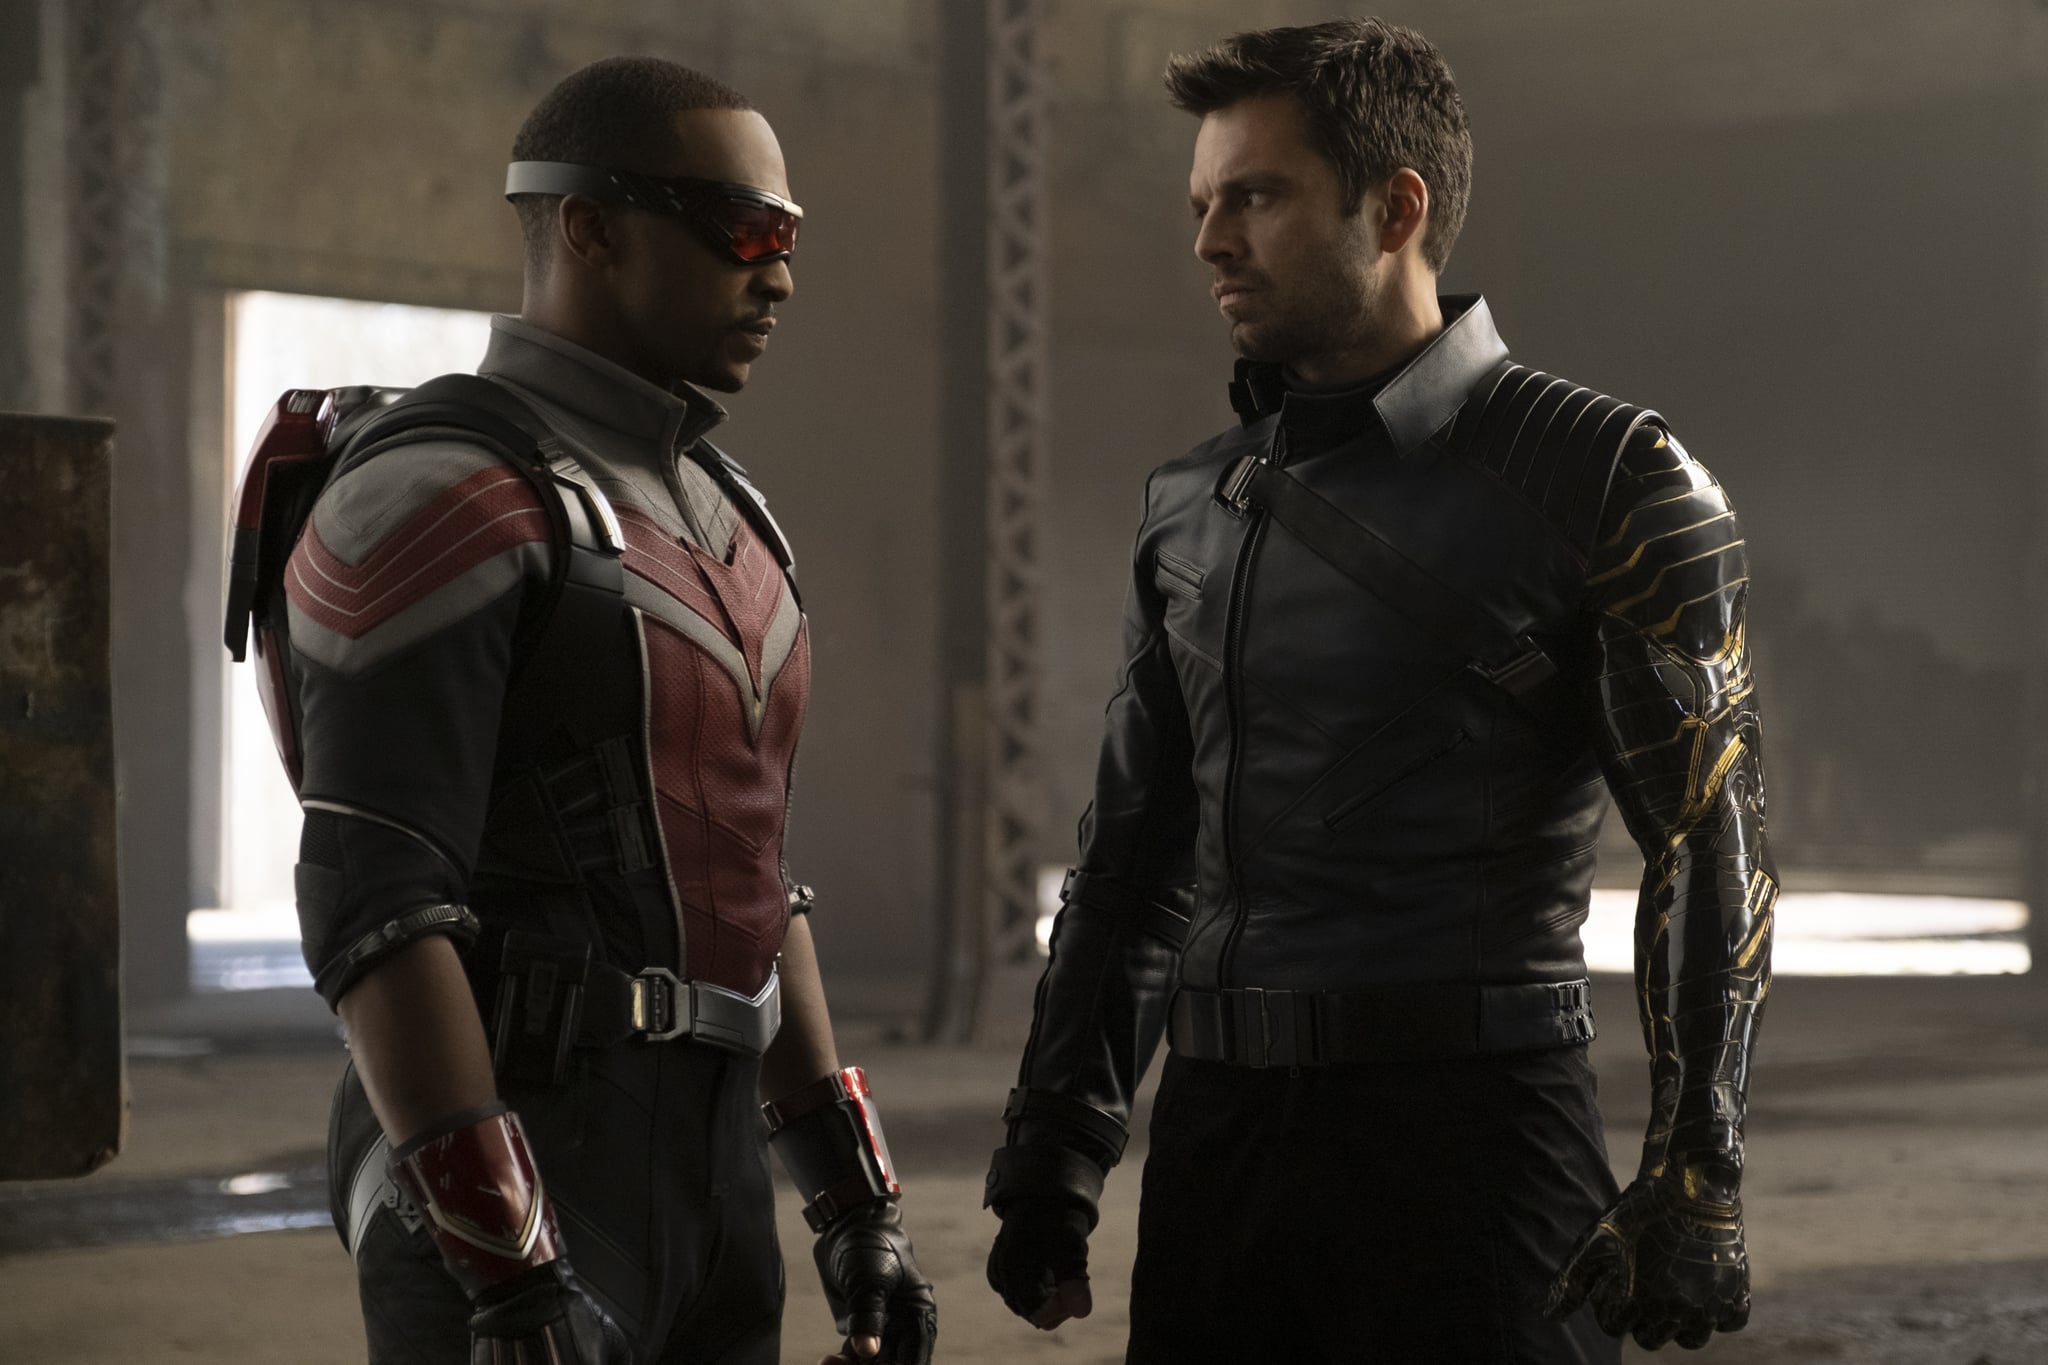 (L-R): Falcon/Sam Wilson (Anthony Mackie) and Winter Soldier/Bucky Barnes (Sebastian Stan) in Marvel Studios' THE FALCON AND THE WINTER SOLDIER exclusively on Disney+. Photo by Chuck Zlotnick. ©Marvel Studios 2020. All Rights Reserved.